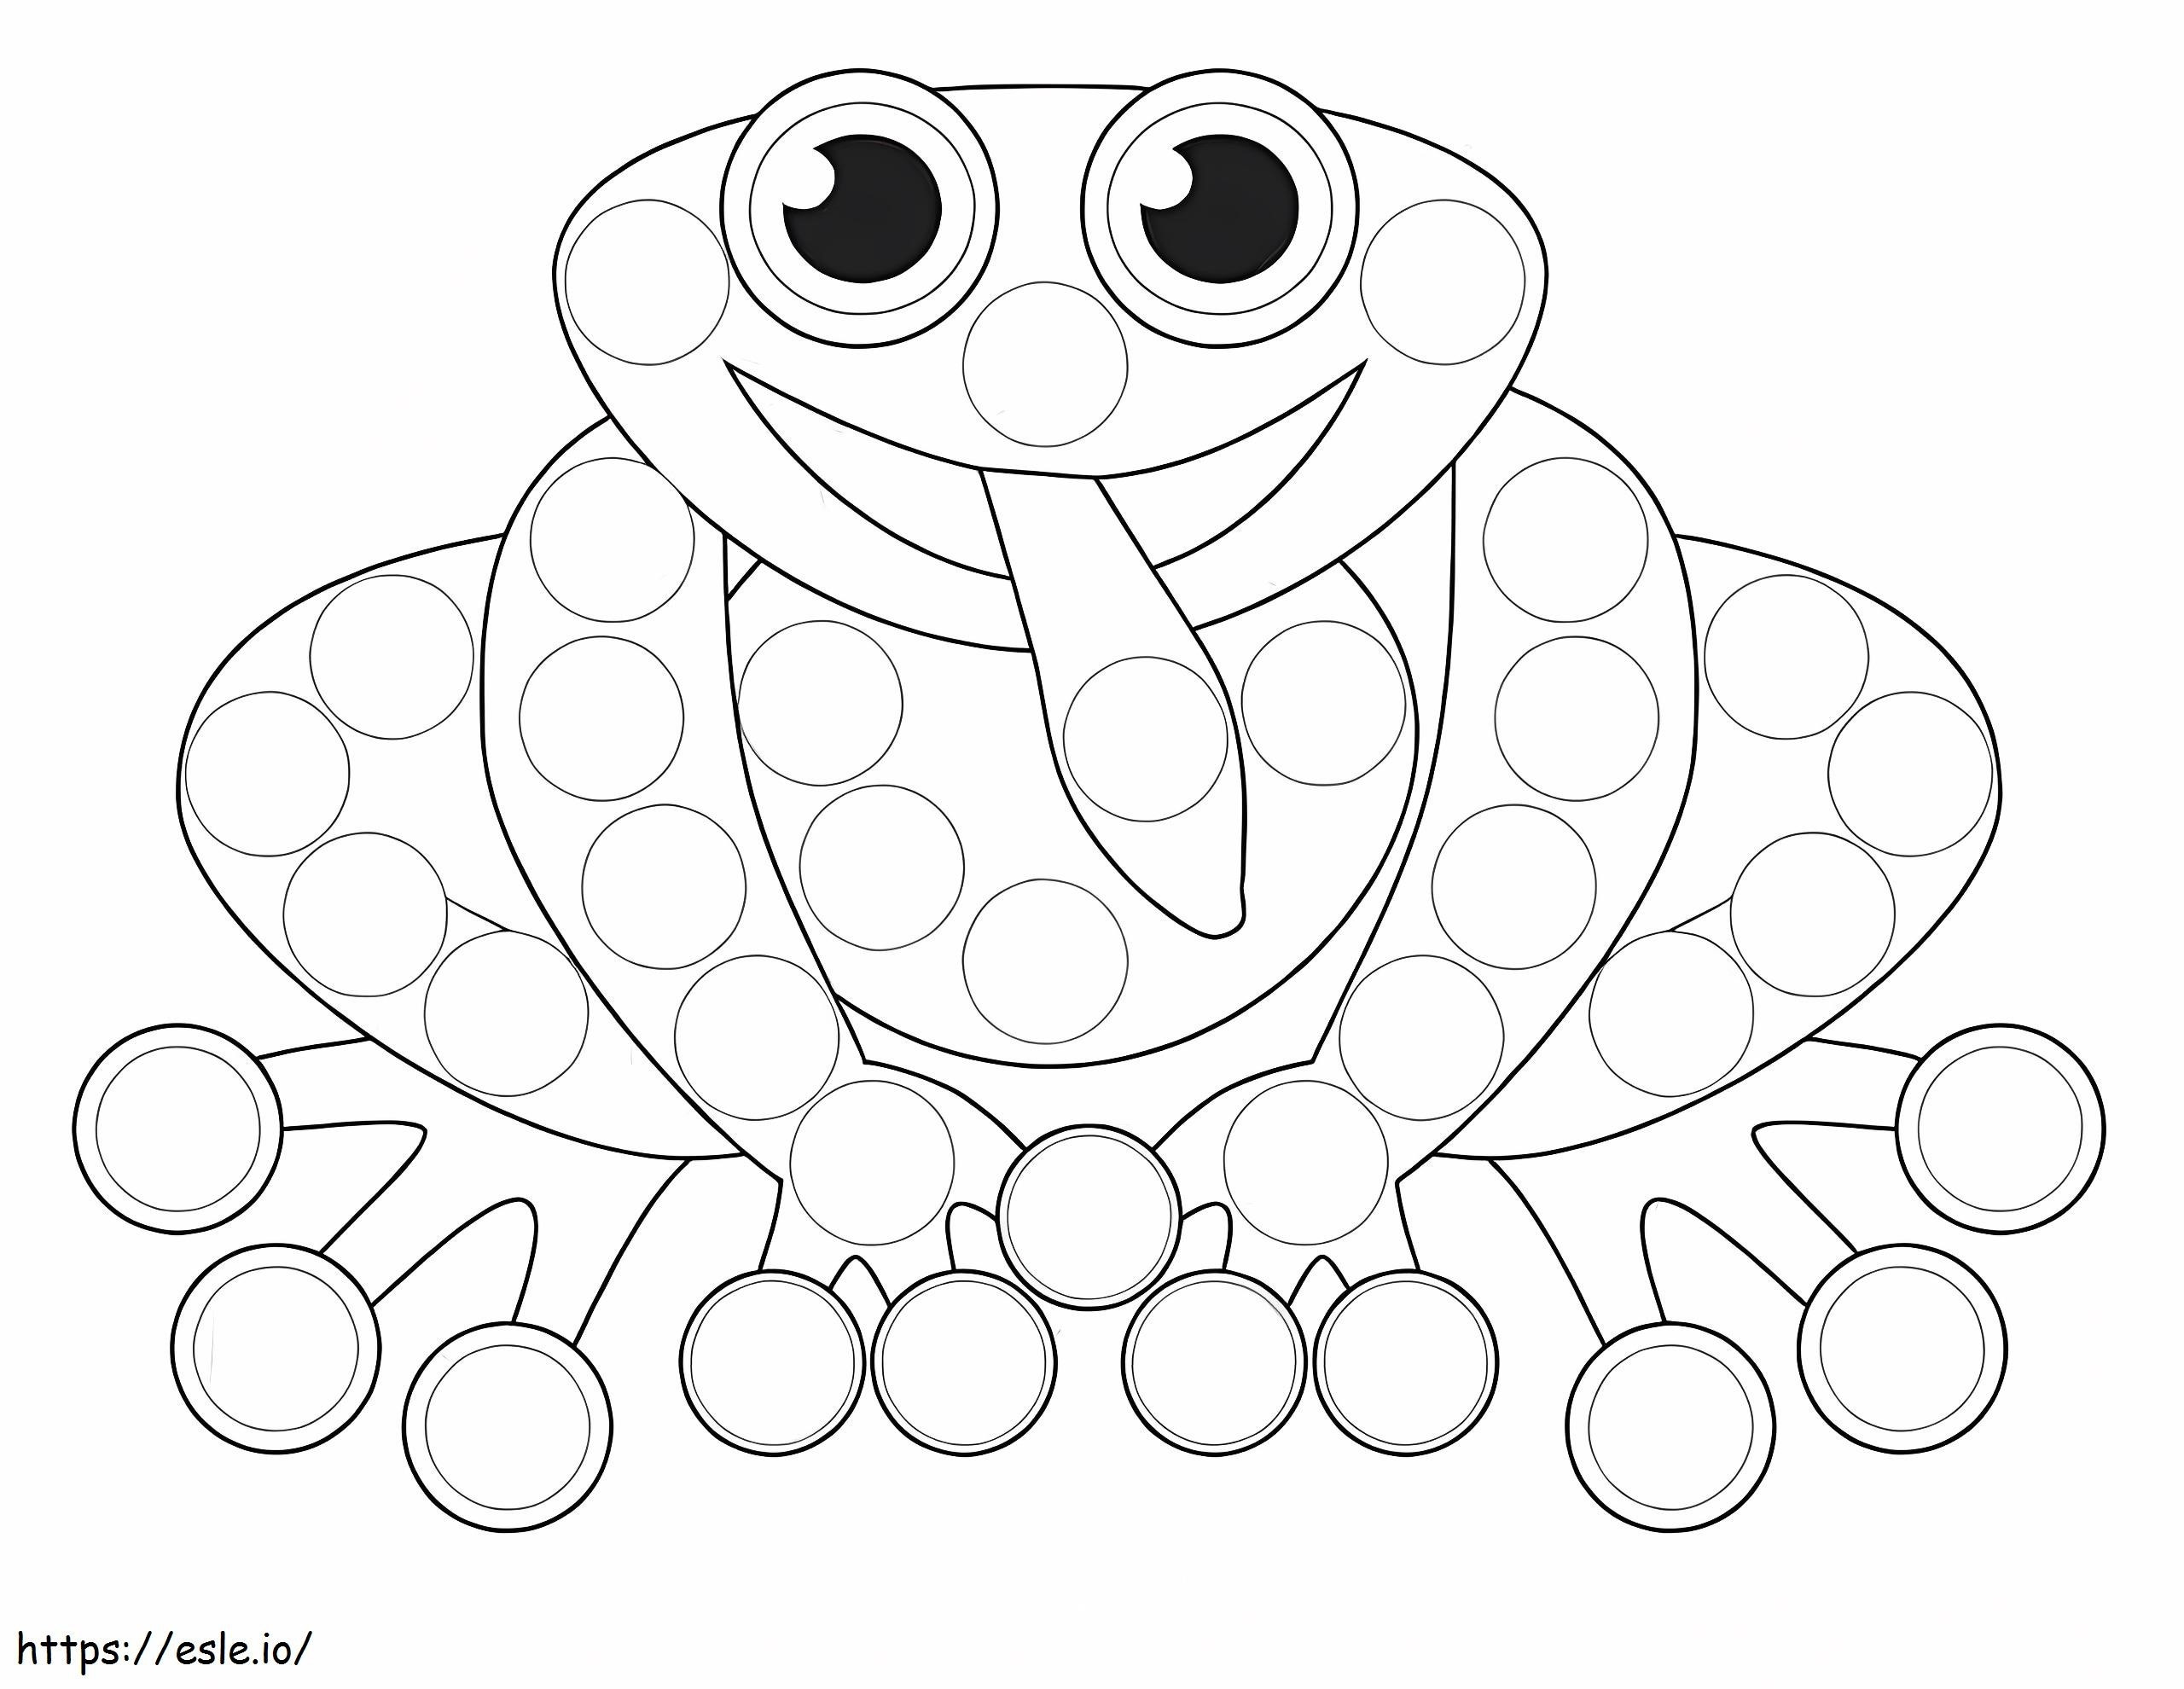 Frog Dot Marker coloring page